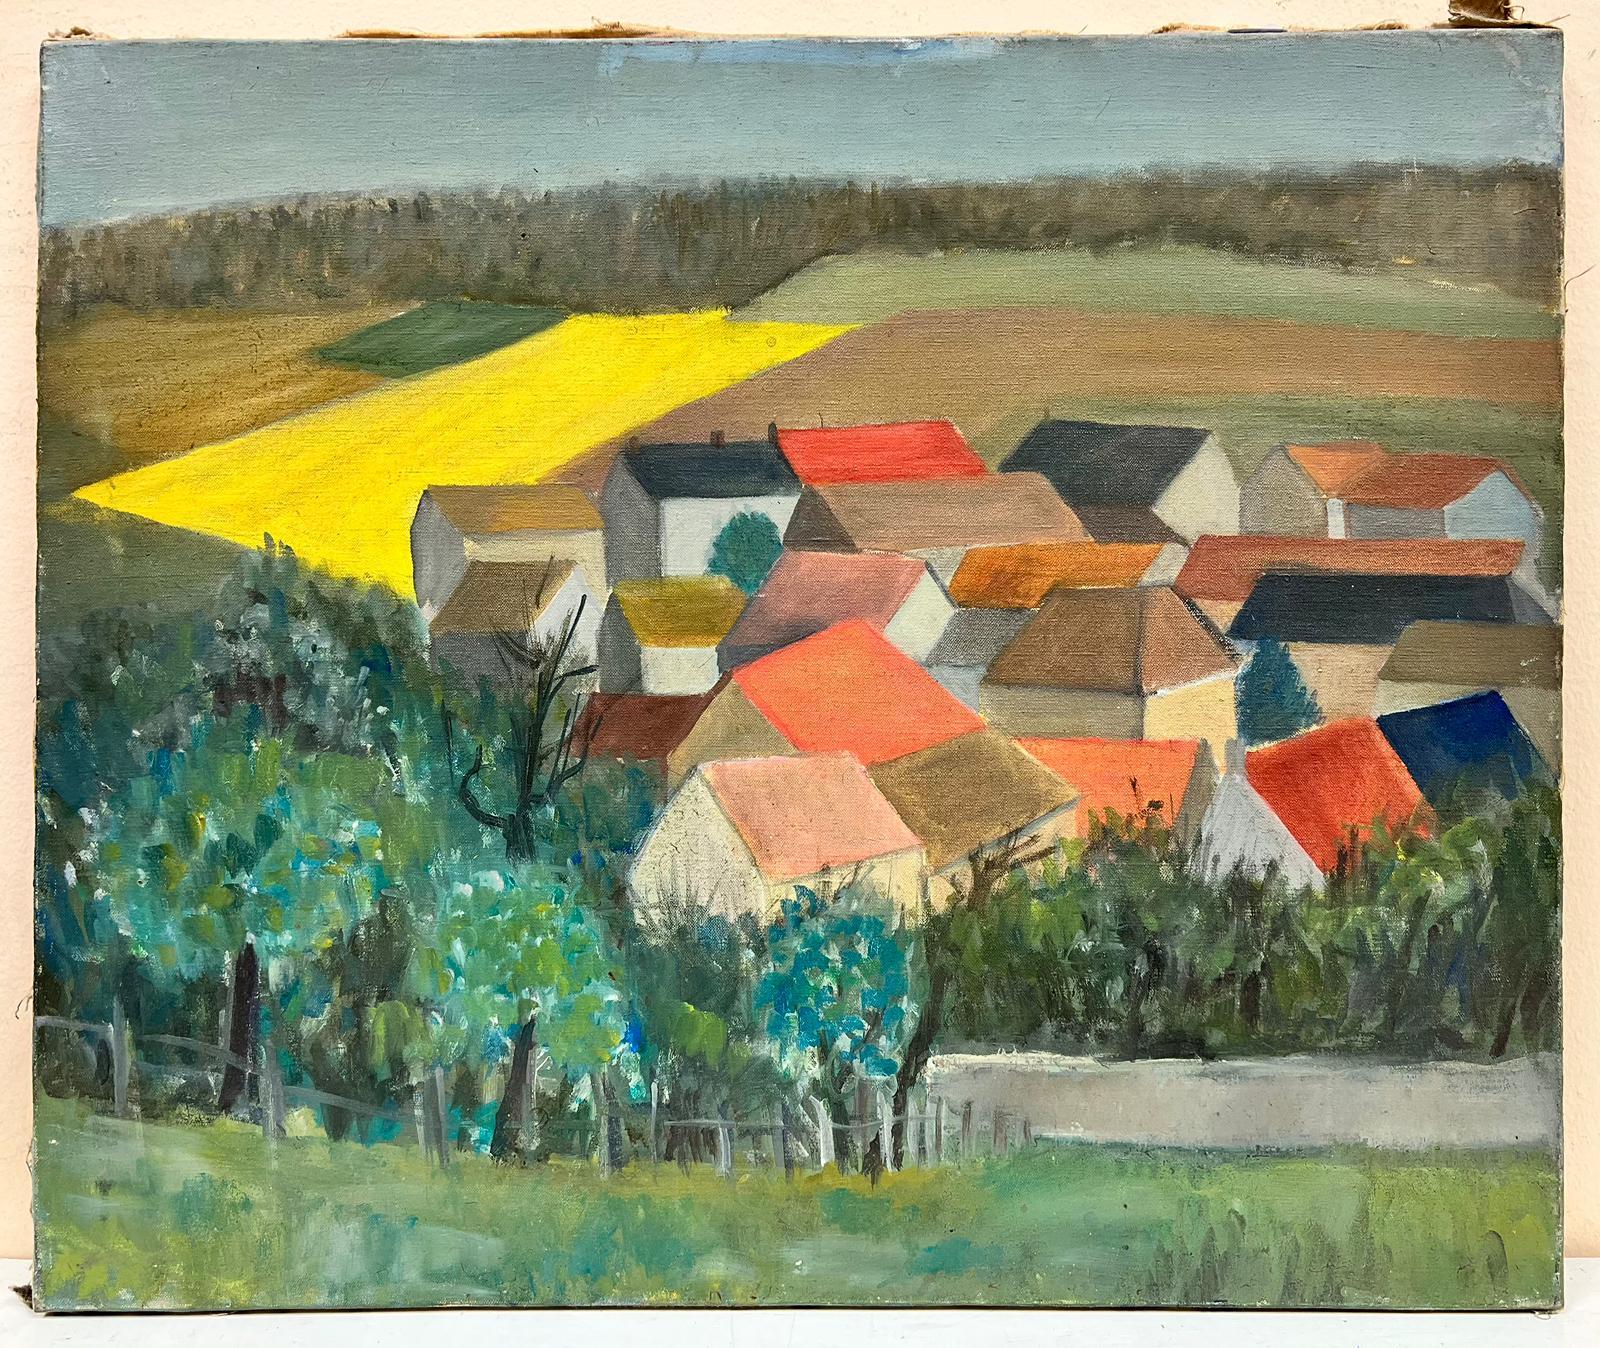 Mid Century French Cubist/ Post Impressionist Oil Red Roof Houses in Landscape - Painting by French Post Impressionist